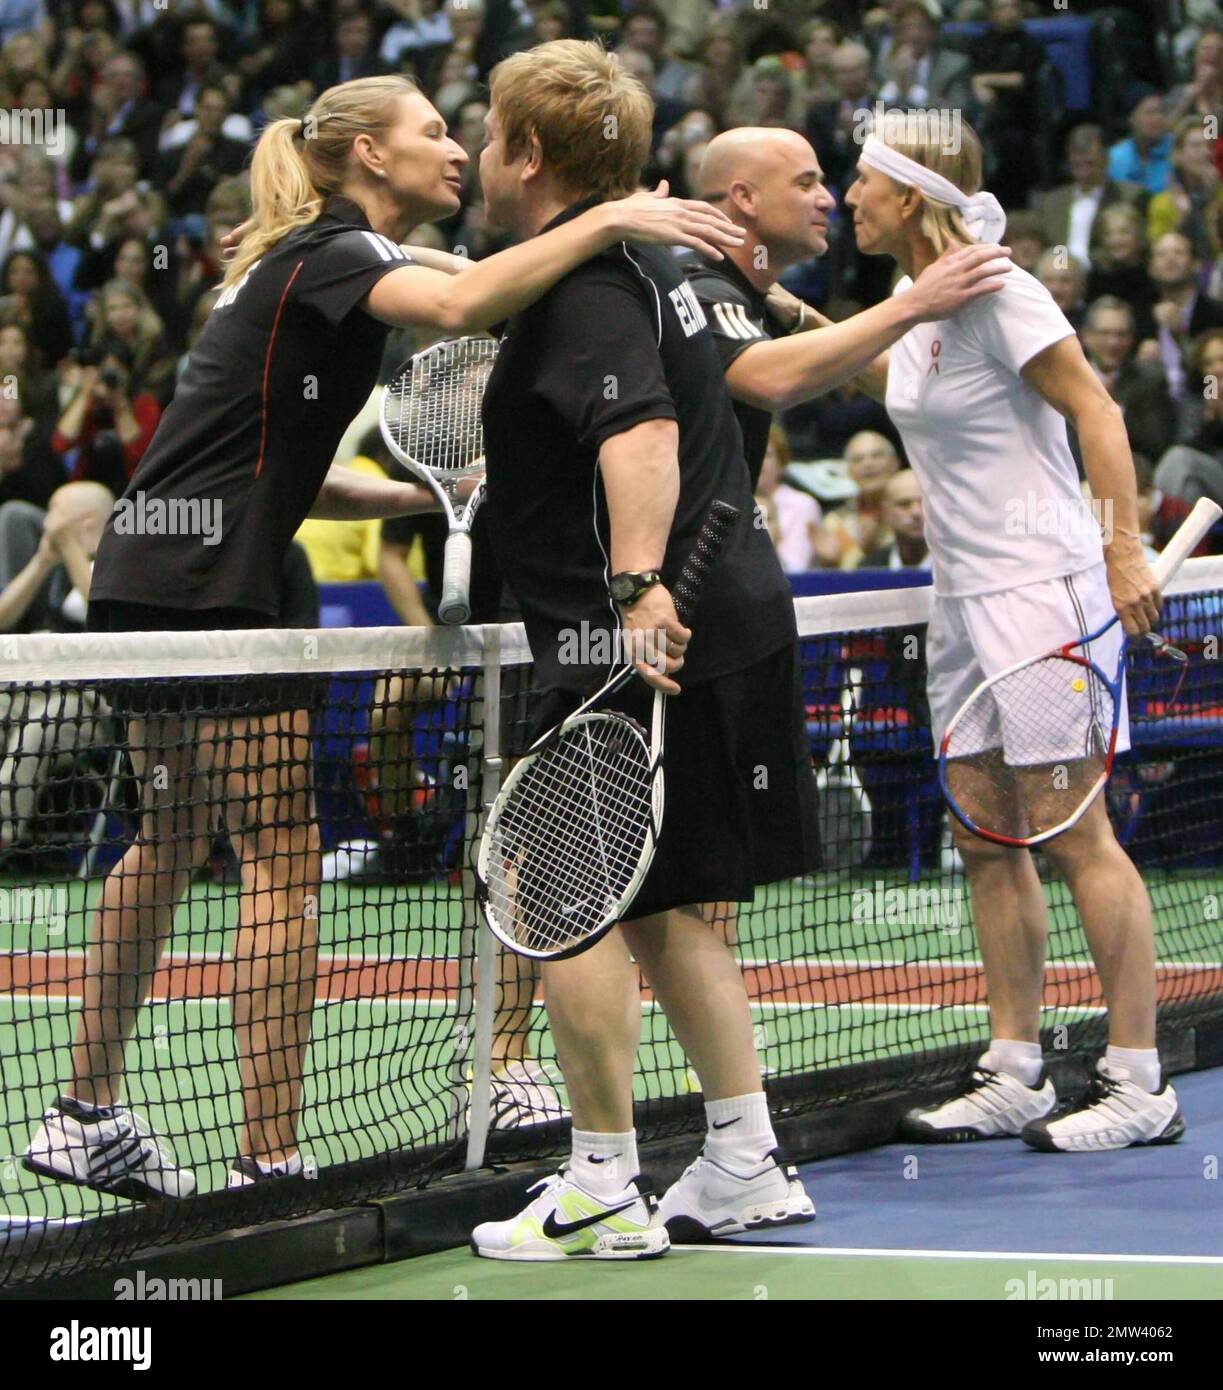 Elton John kisses Stephanie Graf and Andre Agassi kisses Martina Navratilova after the four play a game of doubles at the 18th annual World Team Tennis (WTT) Smash Hits presented by GEICO,